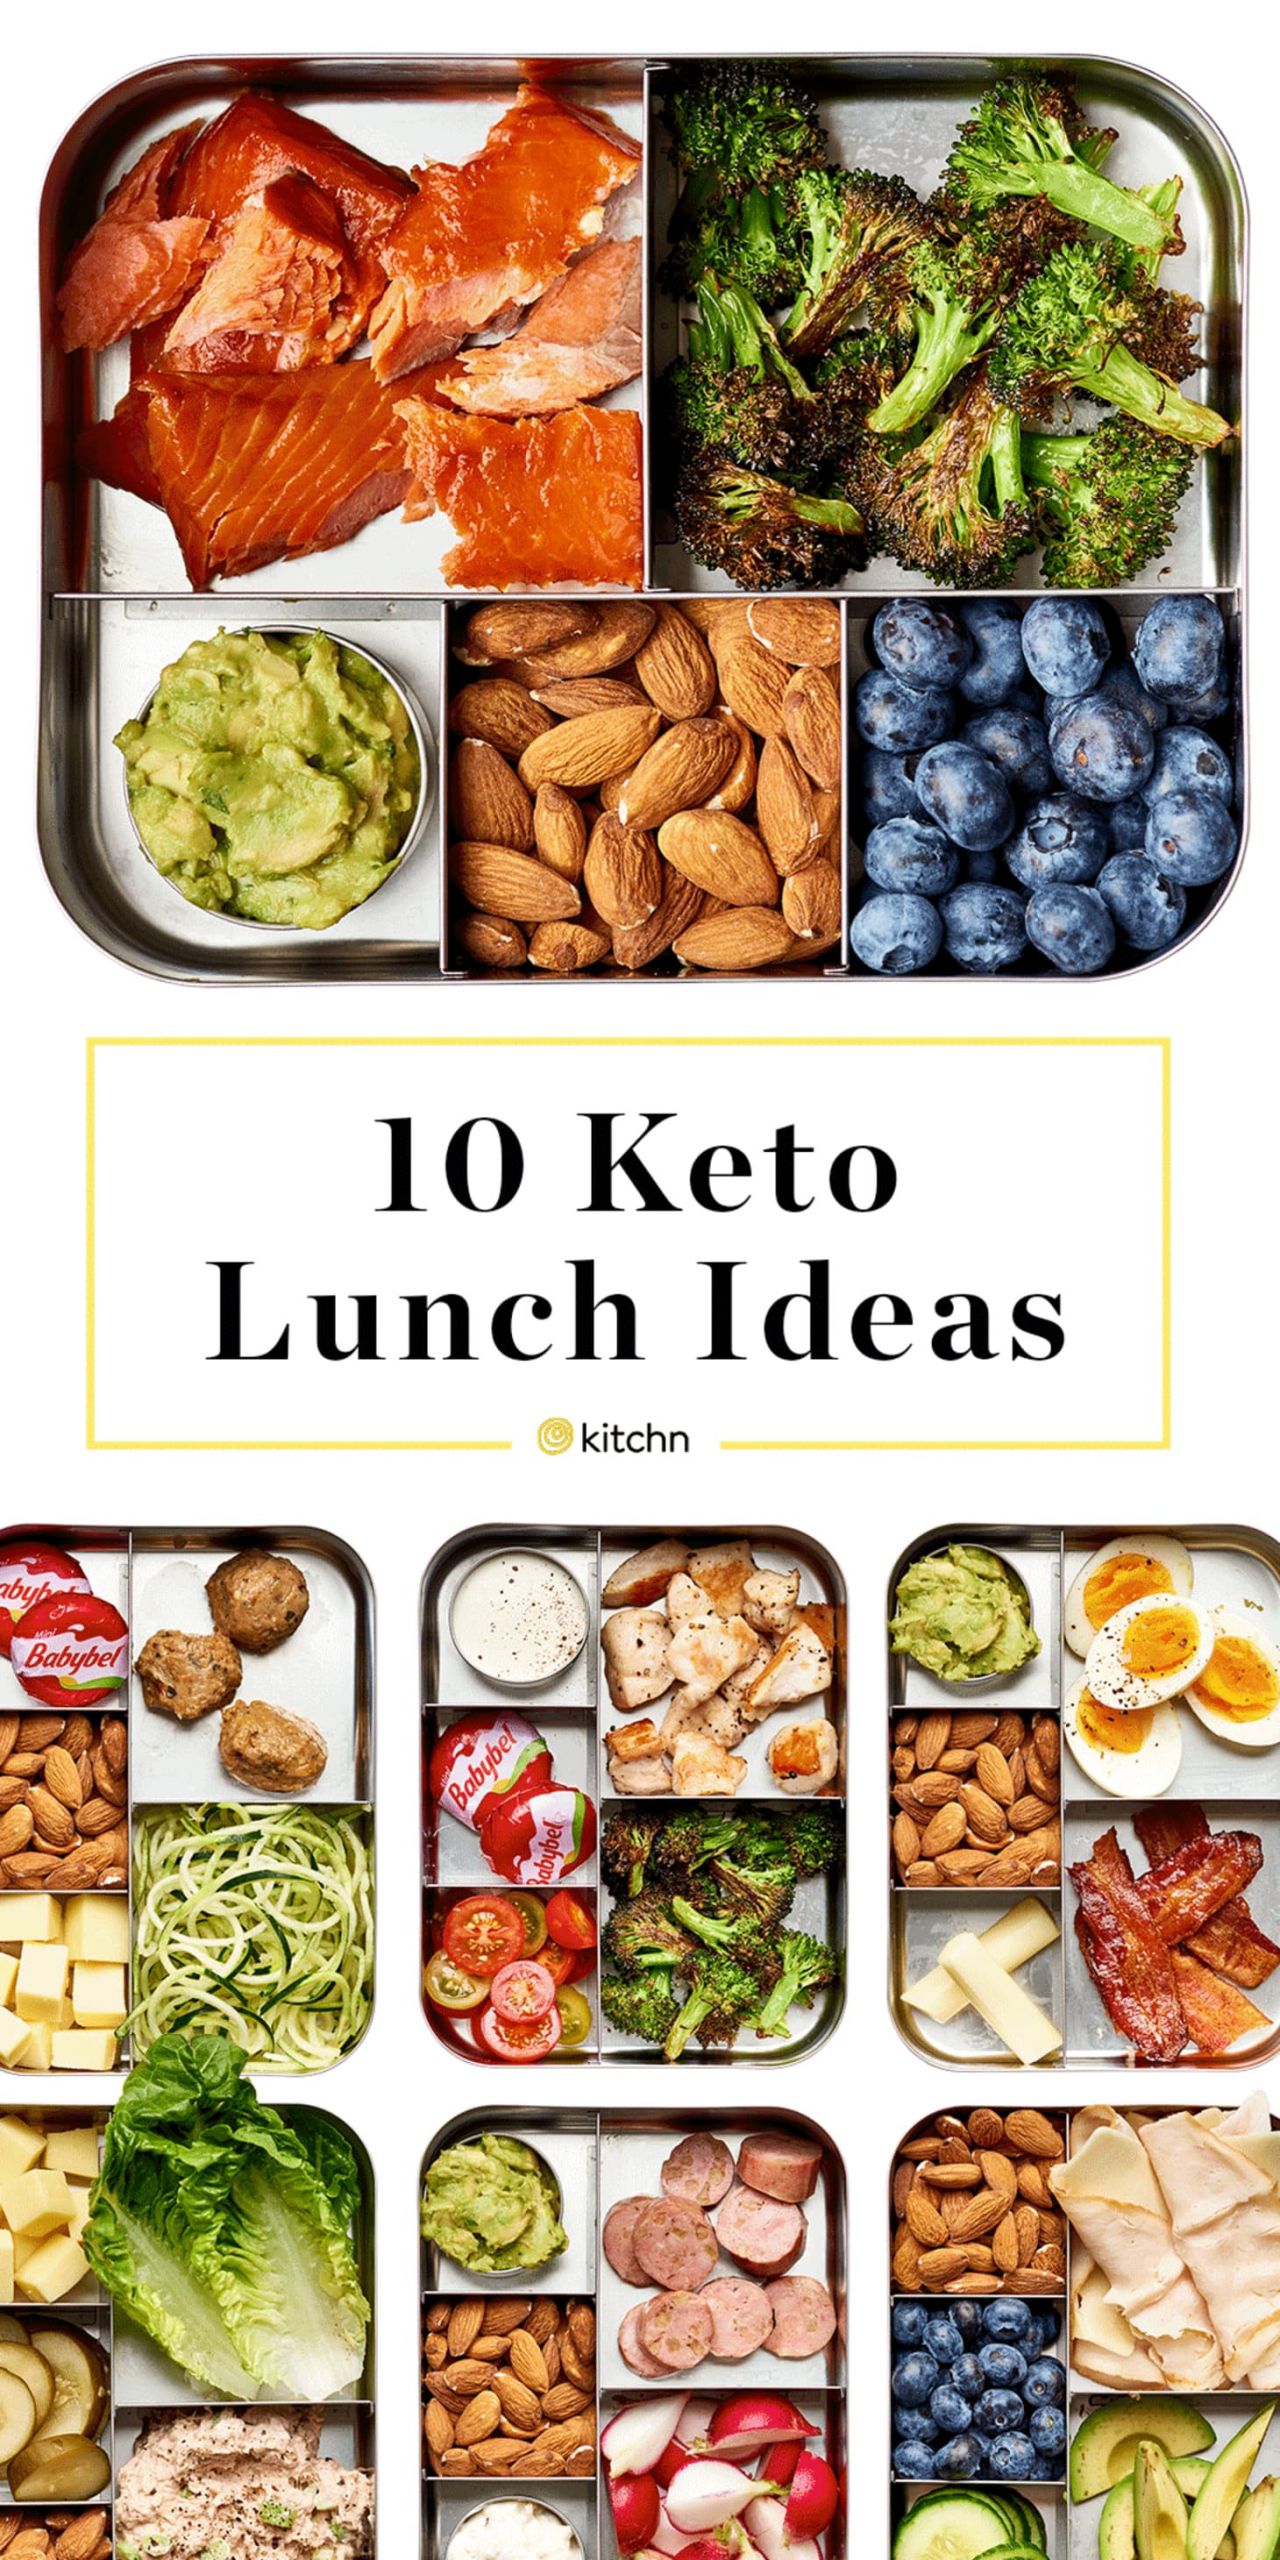 Keto Diet Snack Ideas
 10 Easy Keto Lunch Ideas with Net Carb Counts